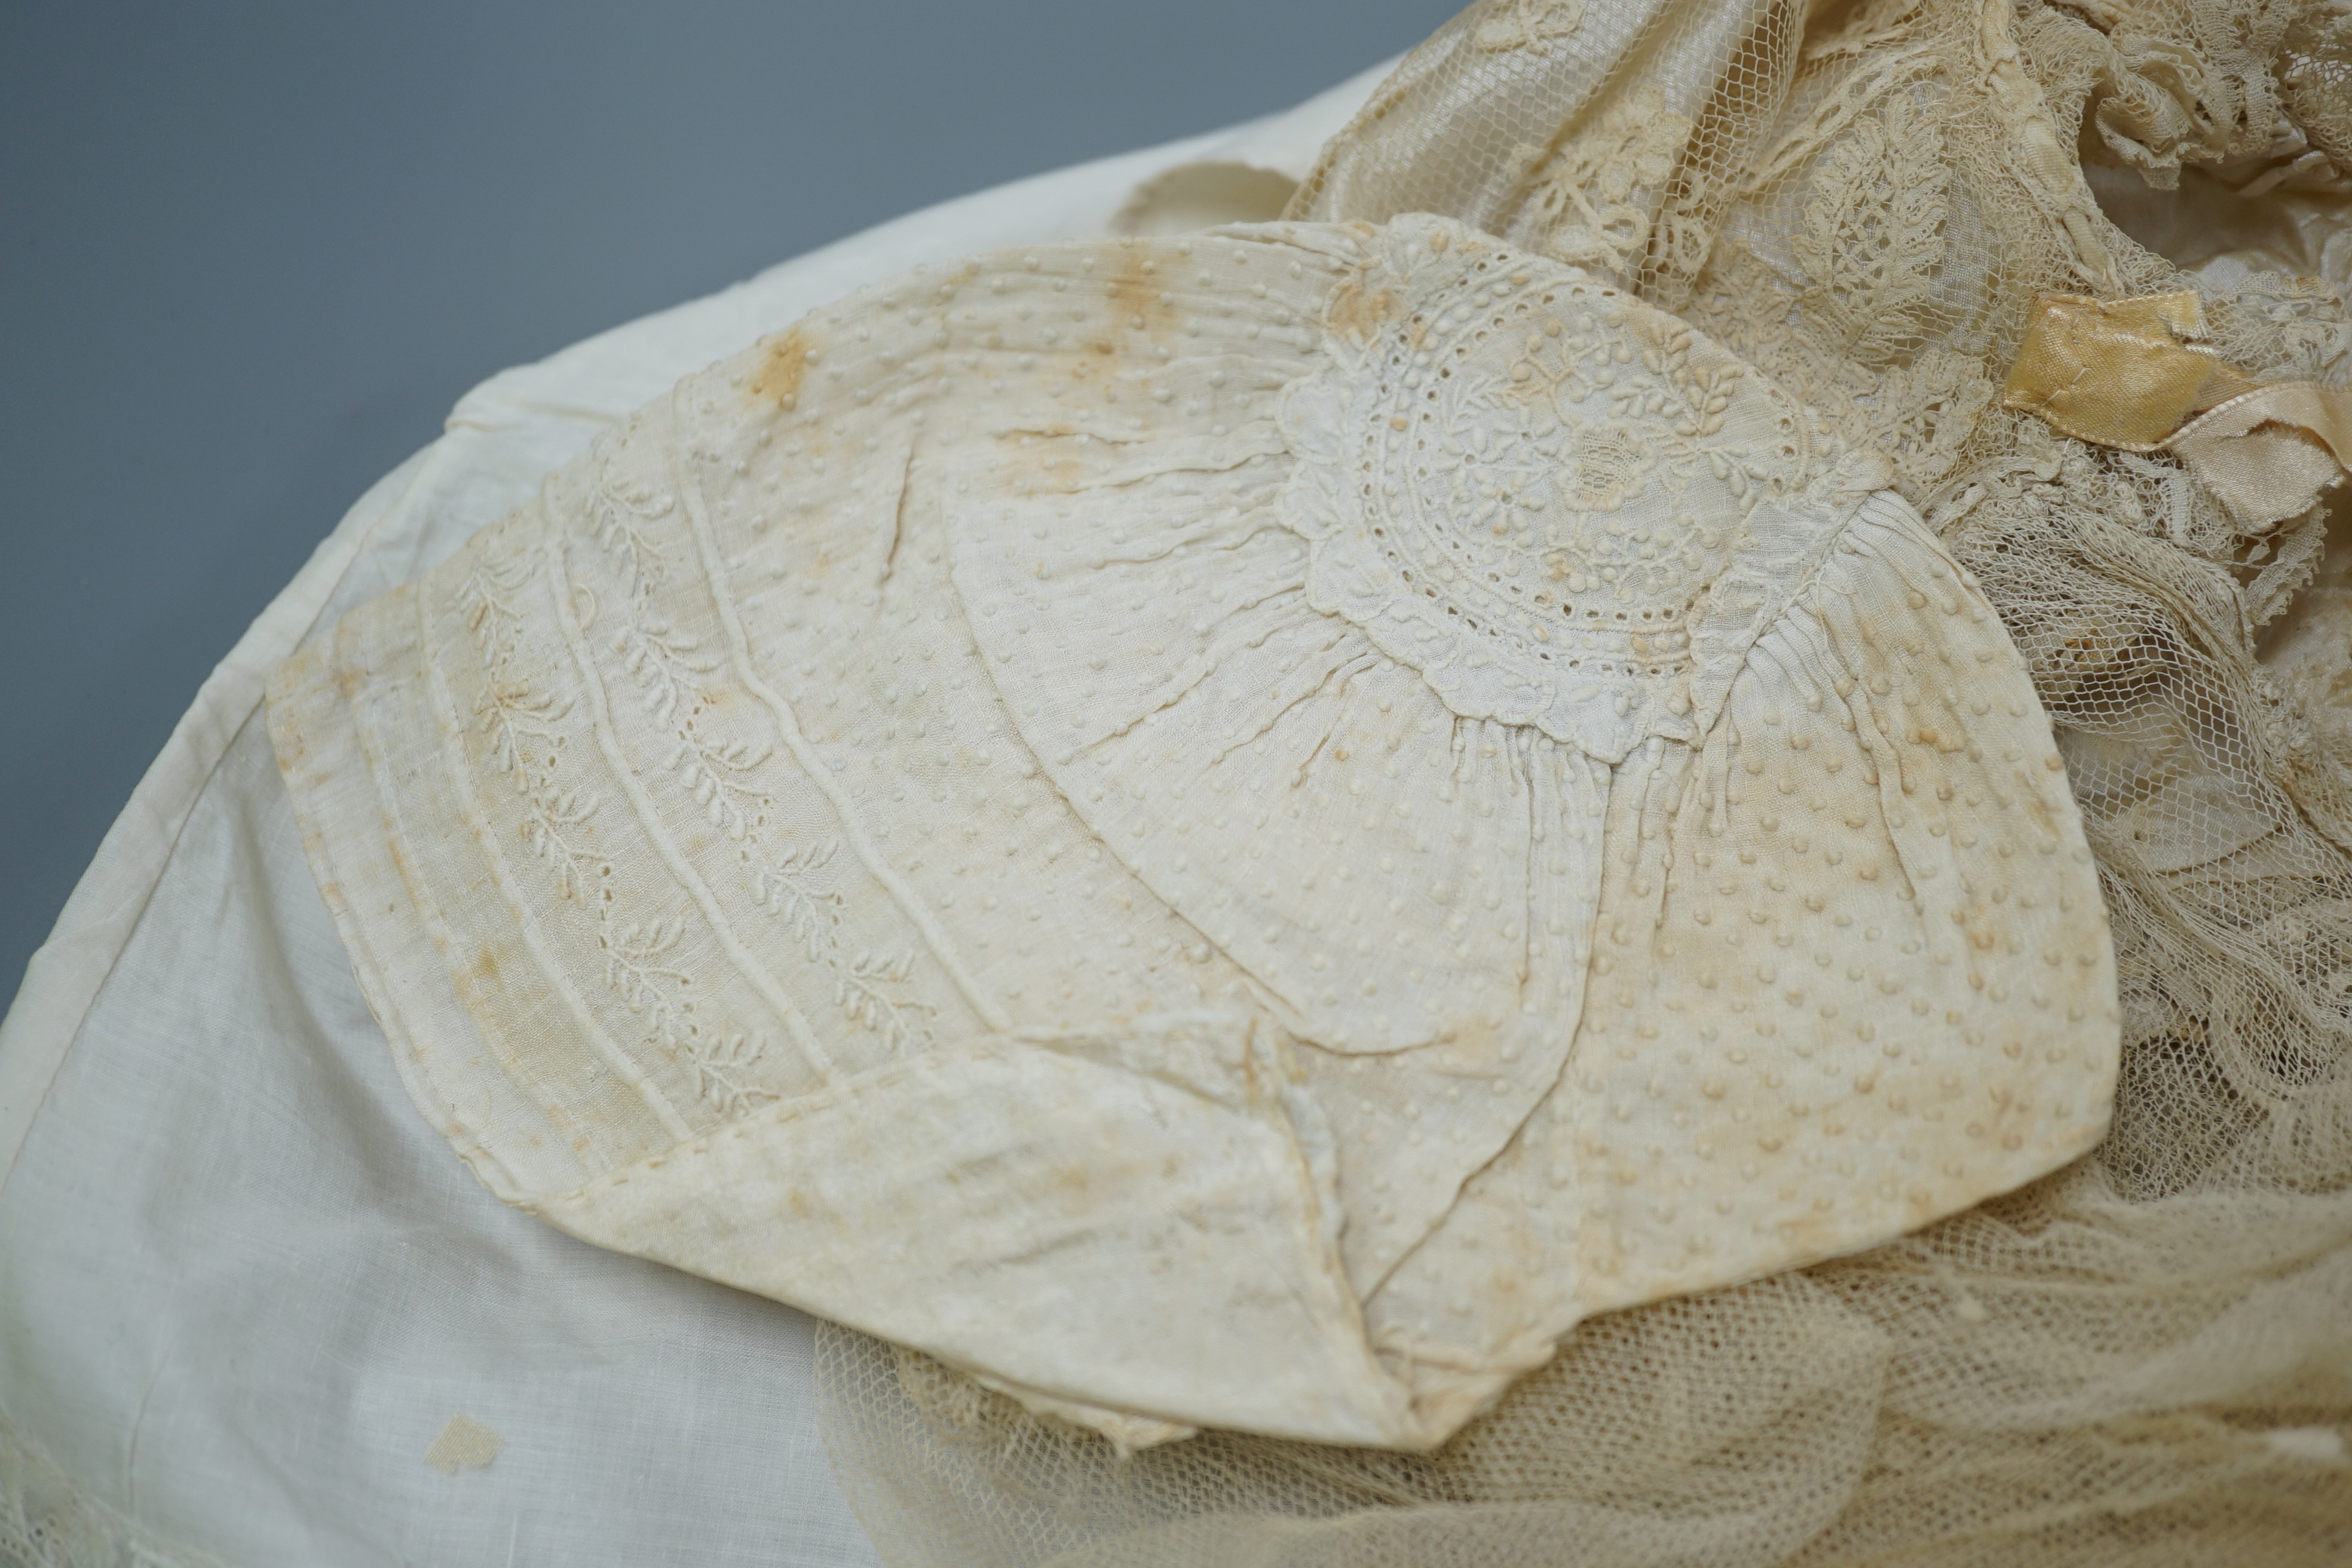 A collection of 19th century babywear, lace and cutwork bonnets and a christening bonnet and veil